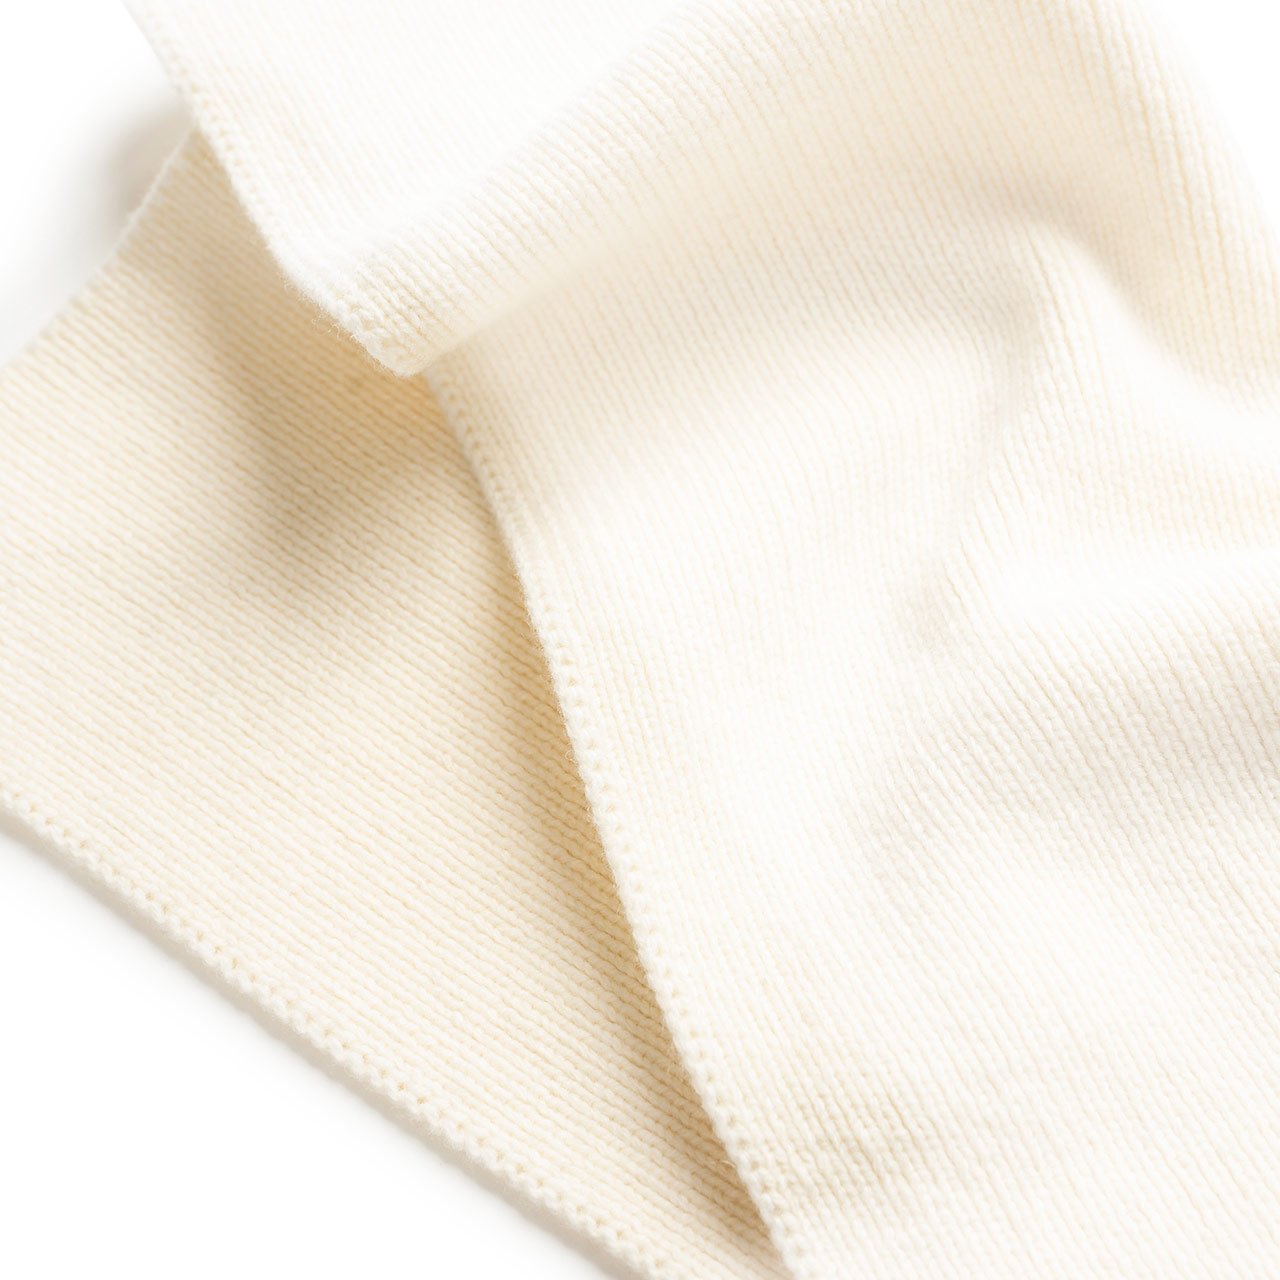 aries rubber patch scarf (white) - frar90001-wht - a.plus - Image - 3